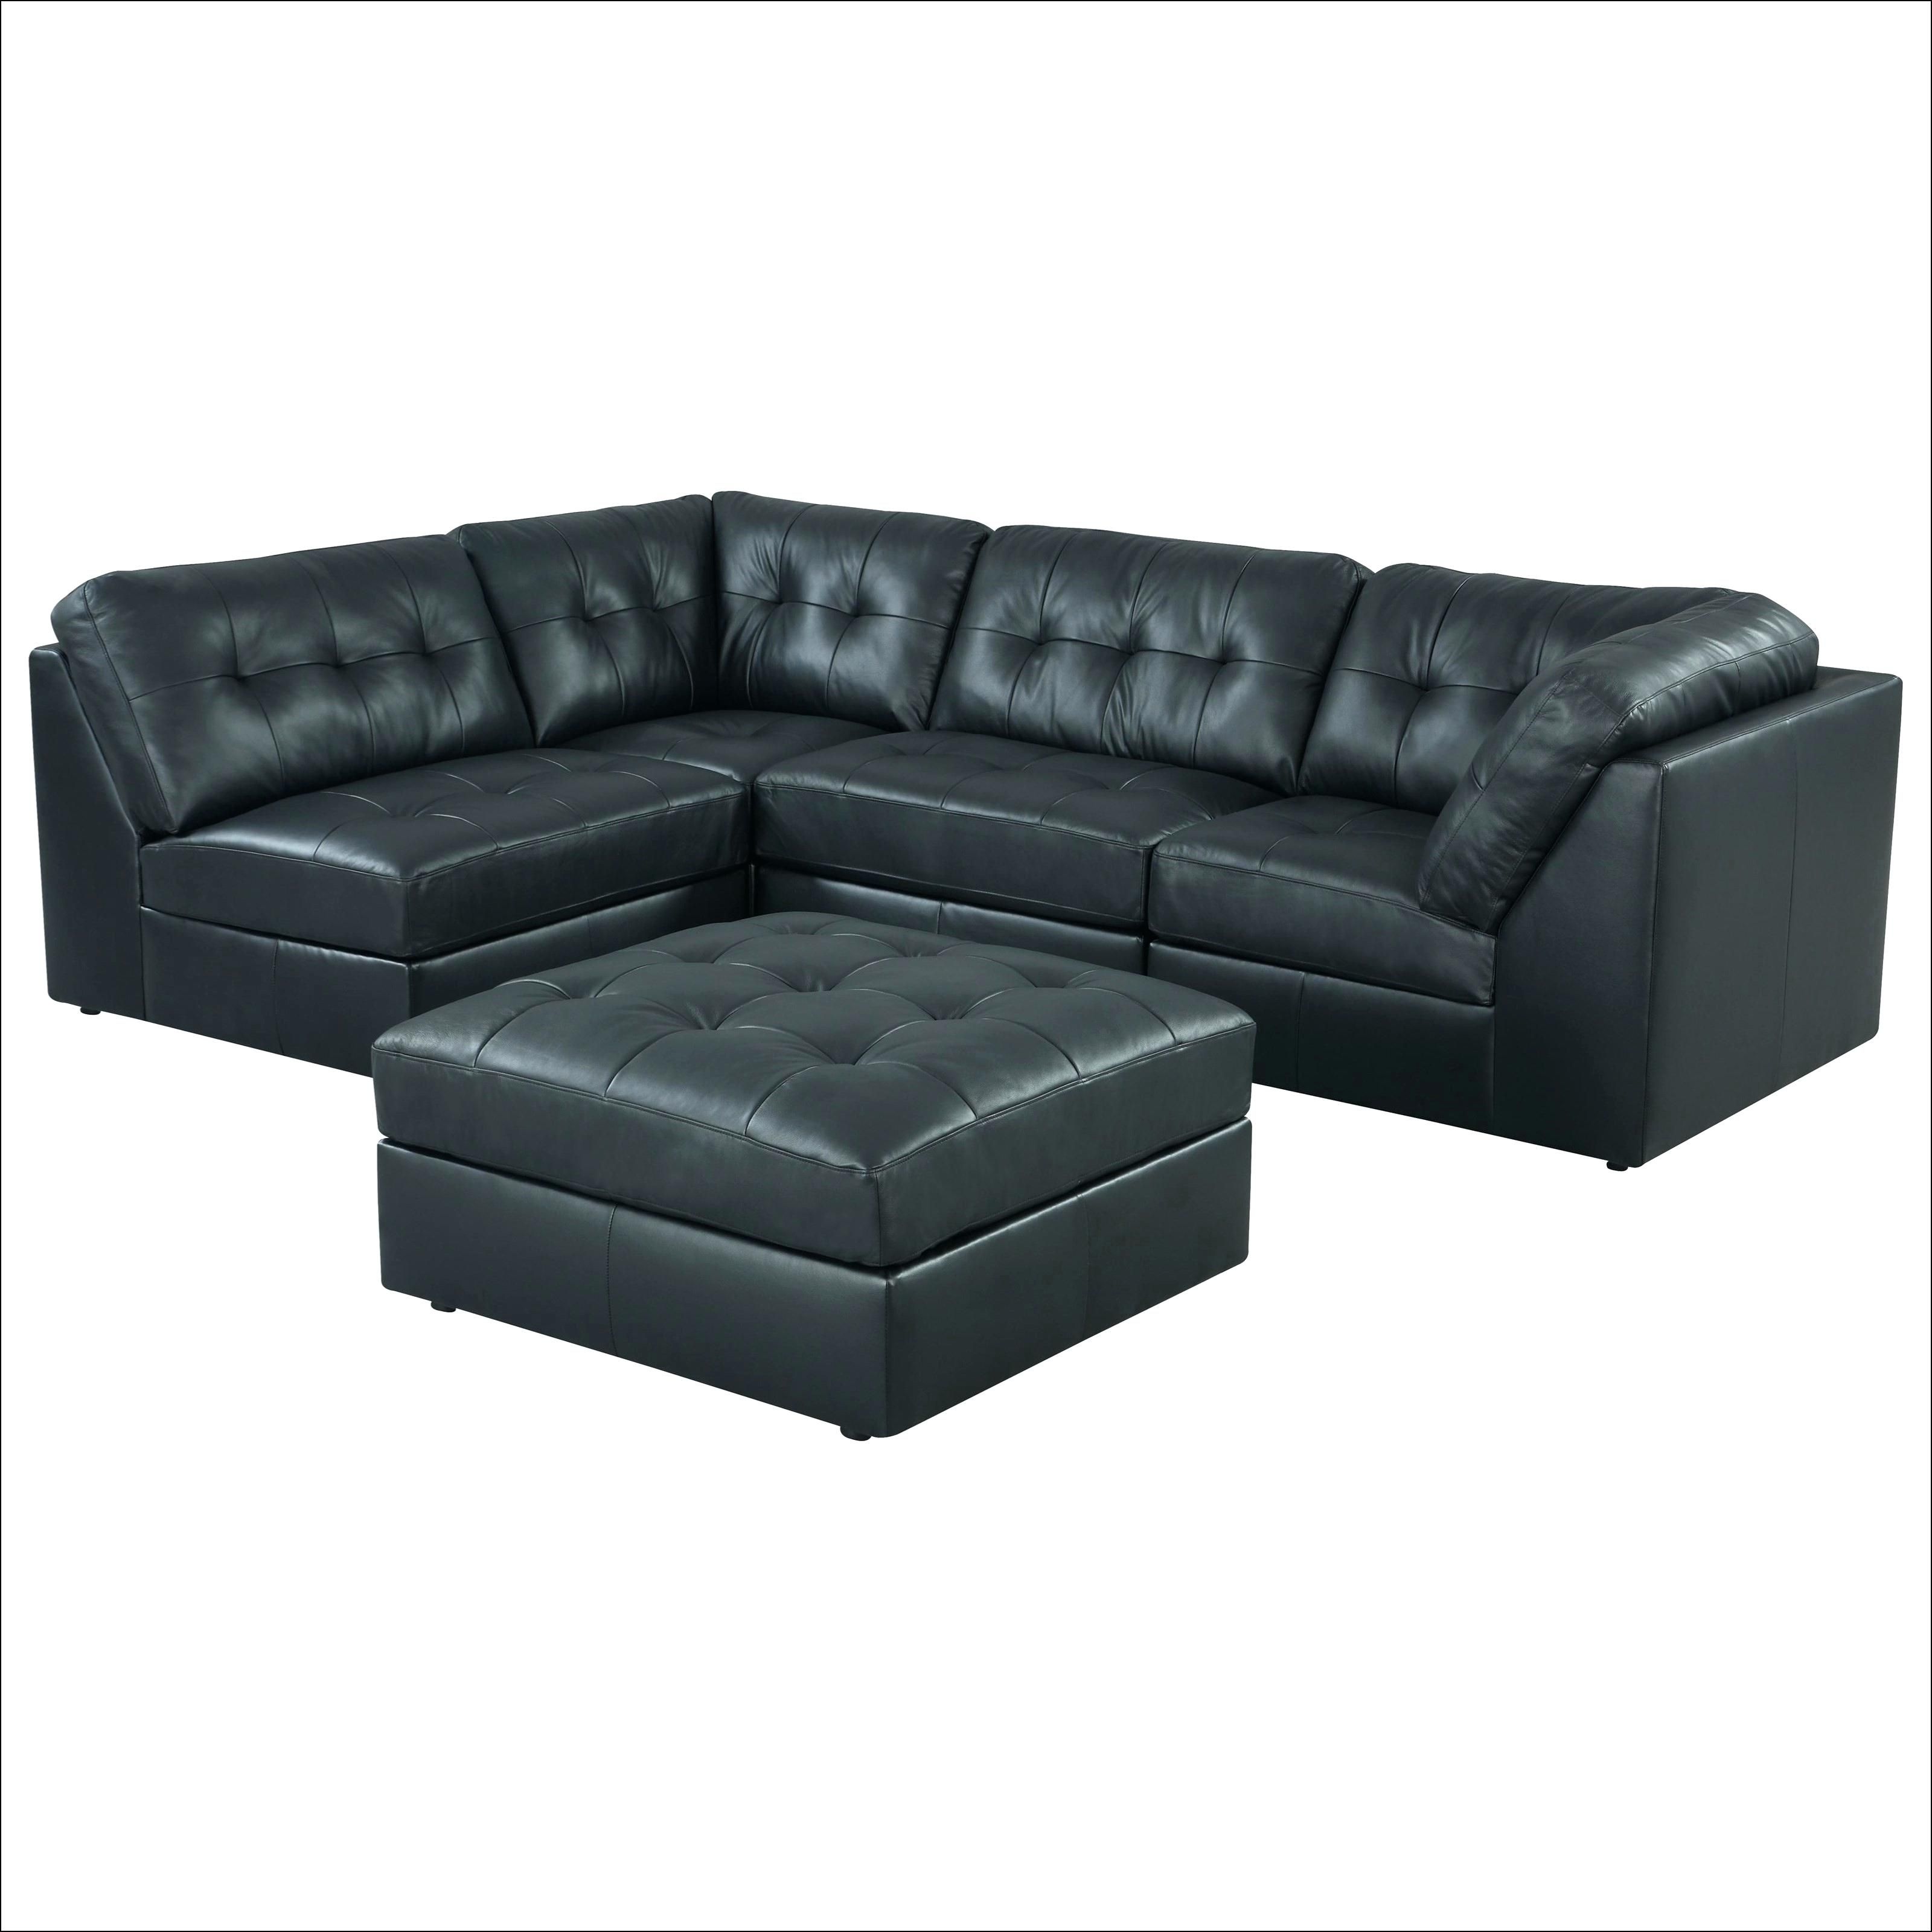 Craigslist Little Rock Furnitureowner Sofa Bed Best Of Used Throughout Little Rock Ar Sectional Sofas (Photo 3 of 10)